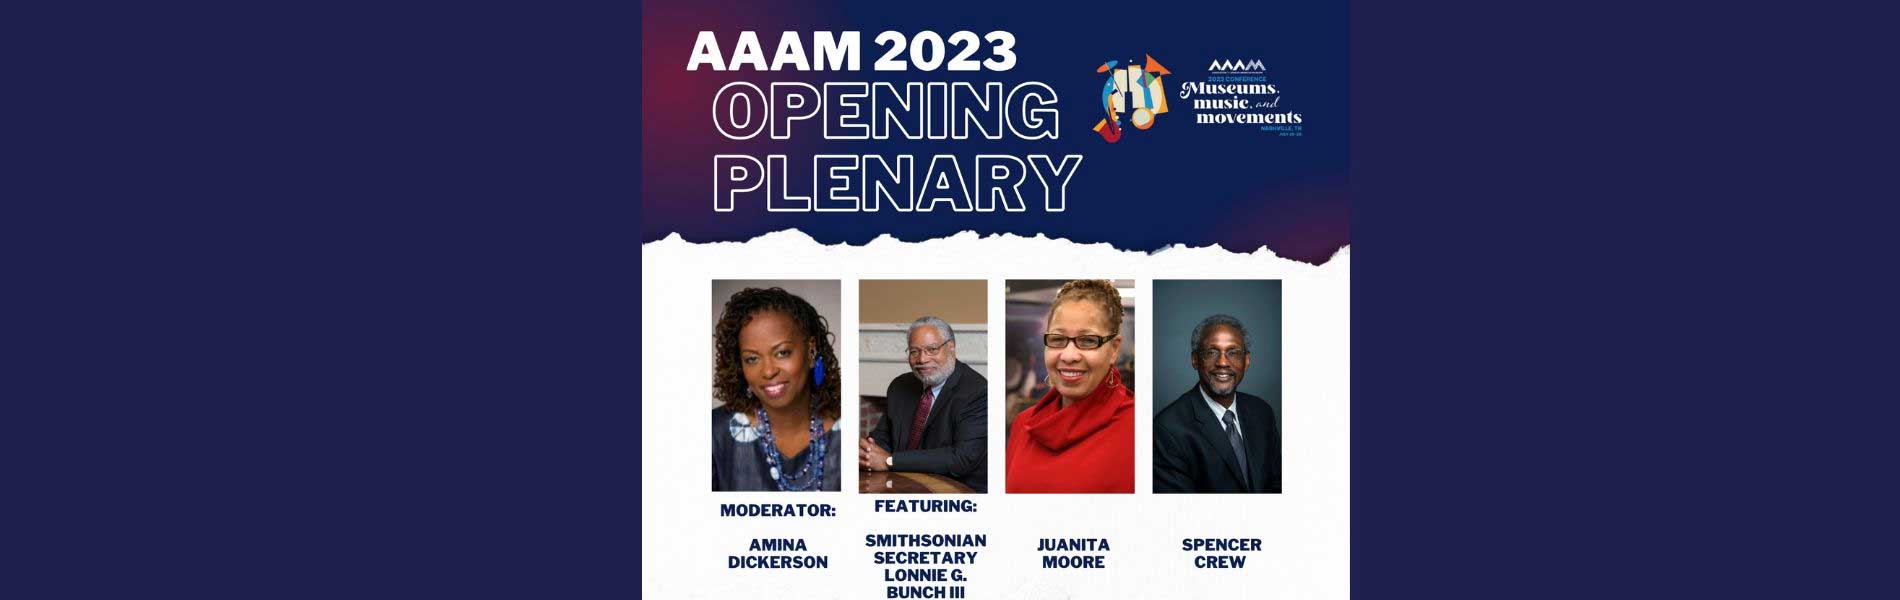 2023 AAAM Conference Opening Plenary speakers